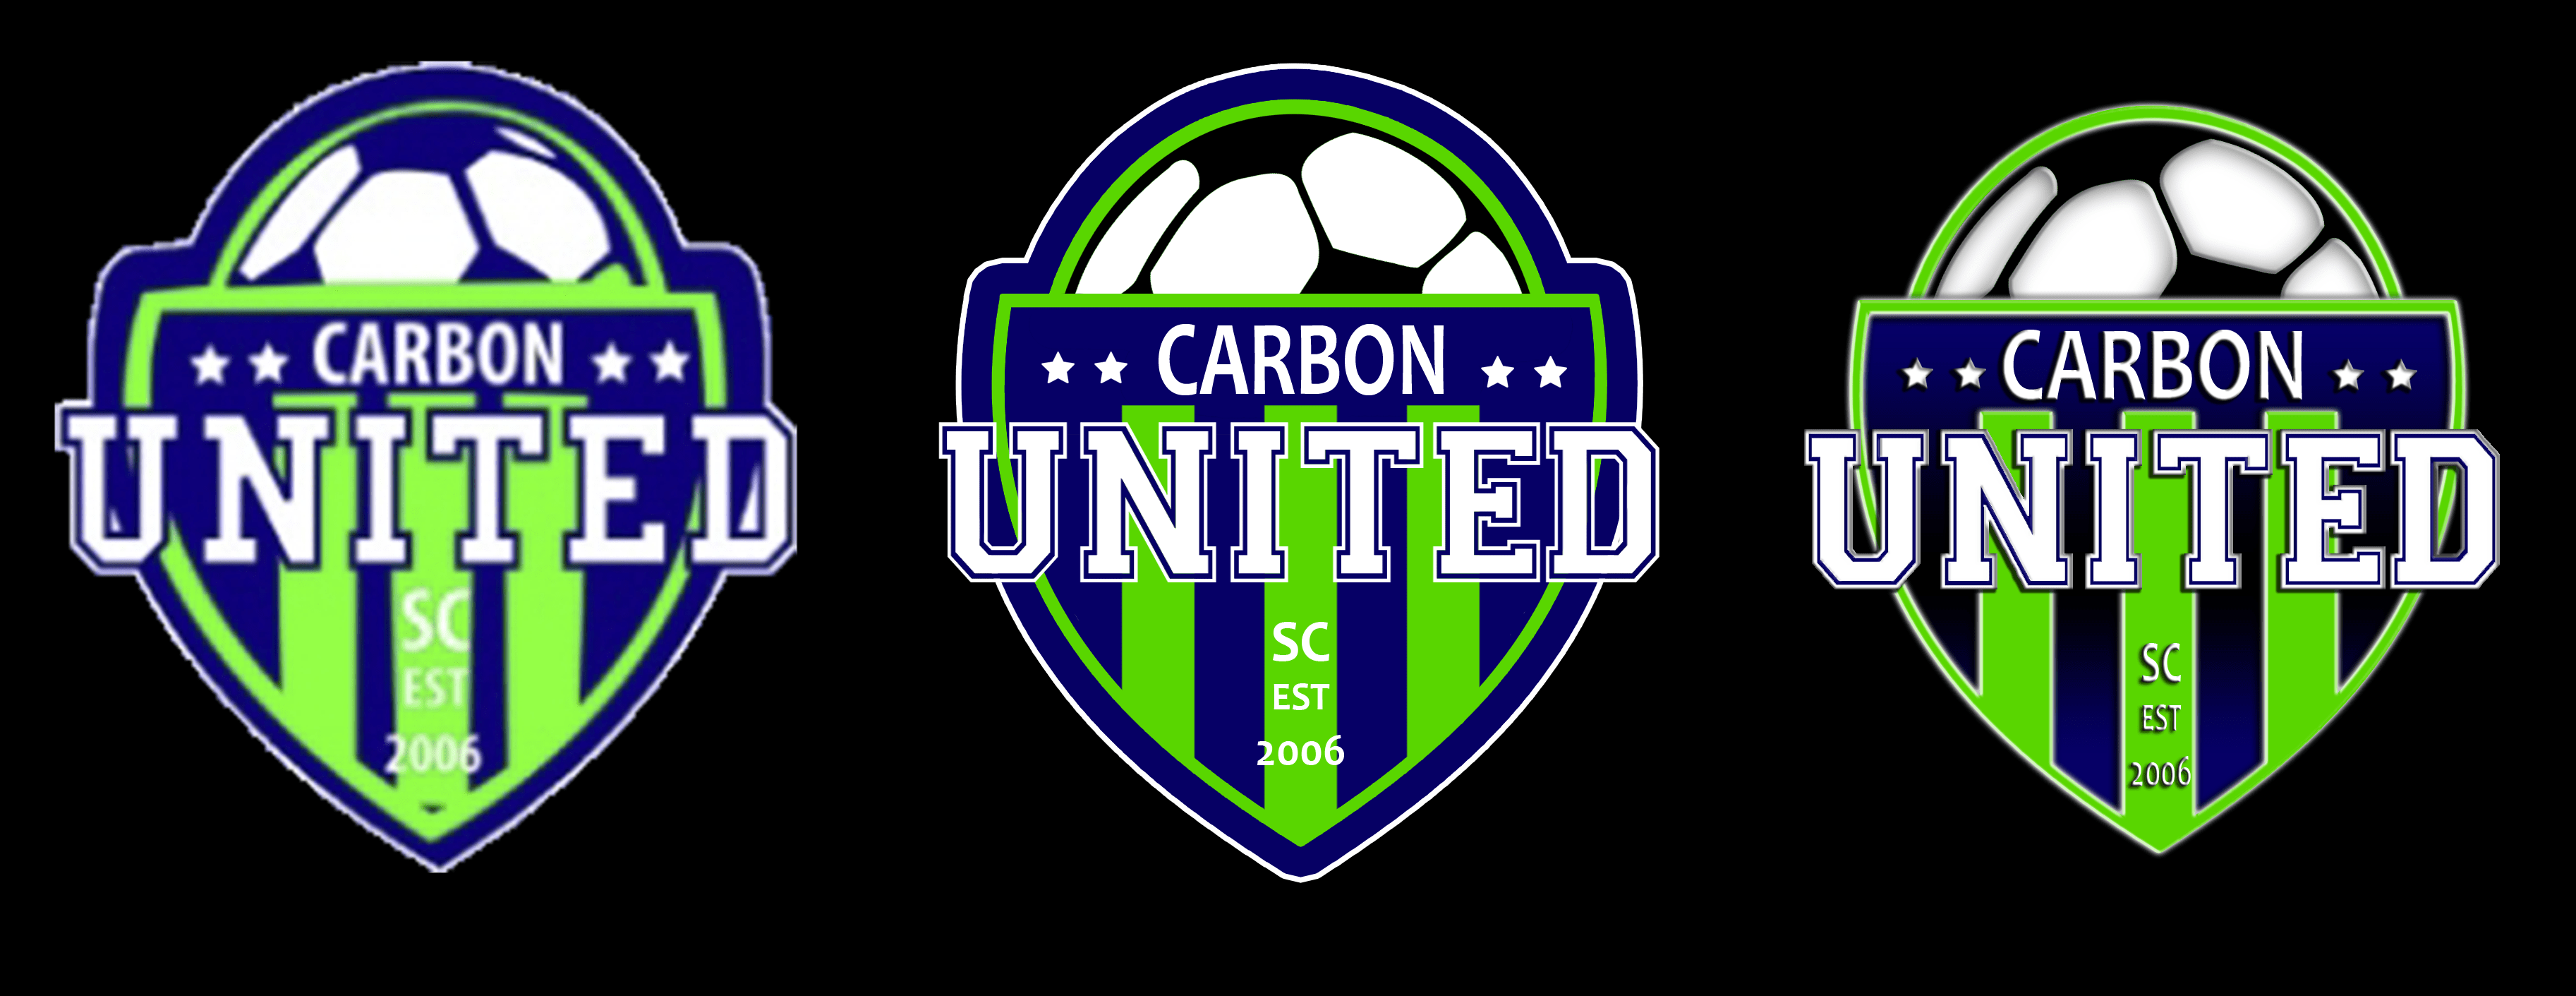 Cleaned up Carbon United Logo.